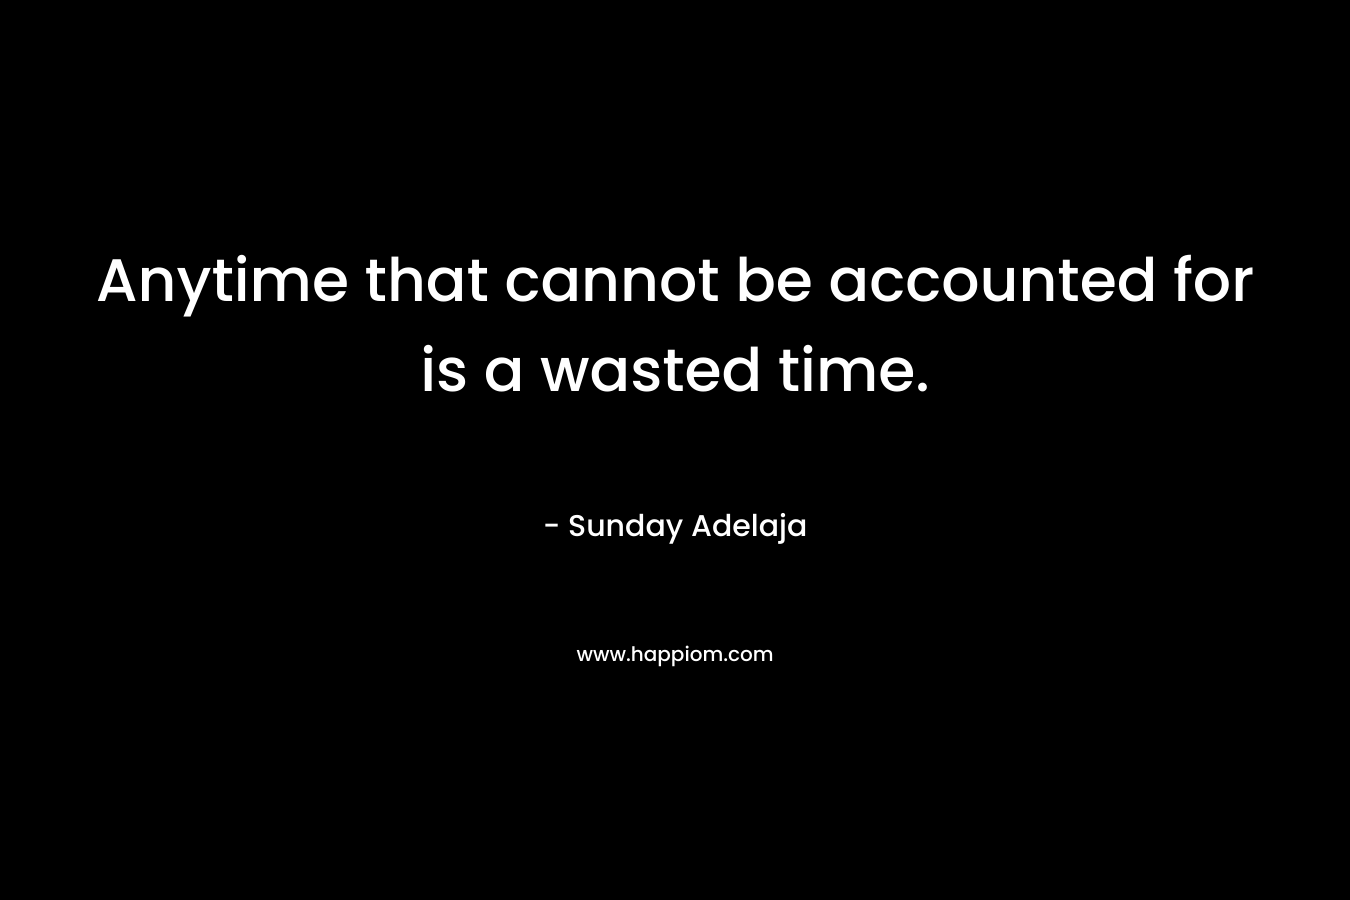 Anytime that cannot be accounted for is a wasted time.